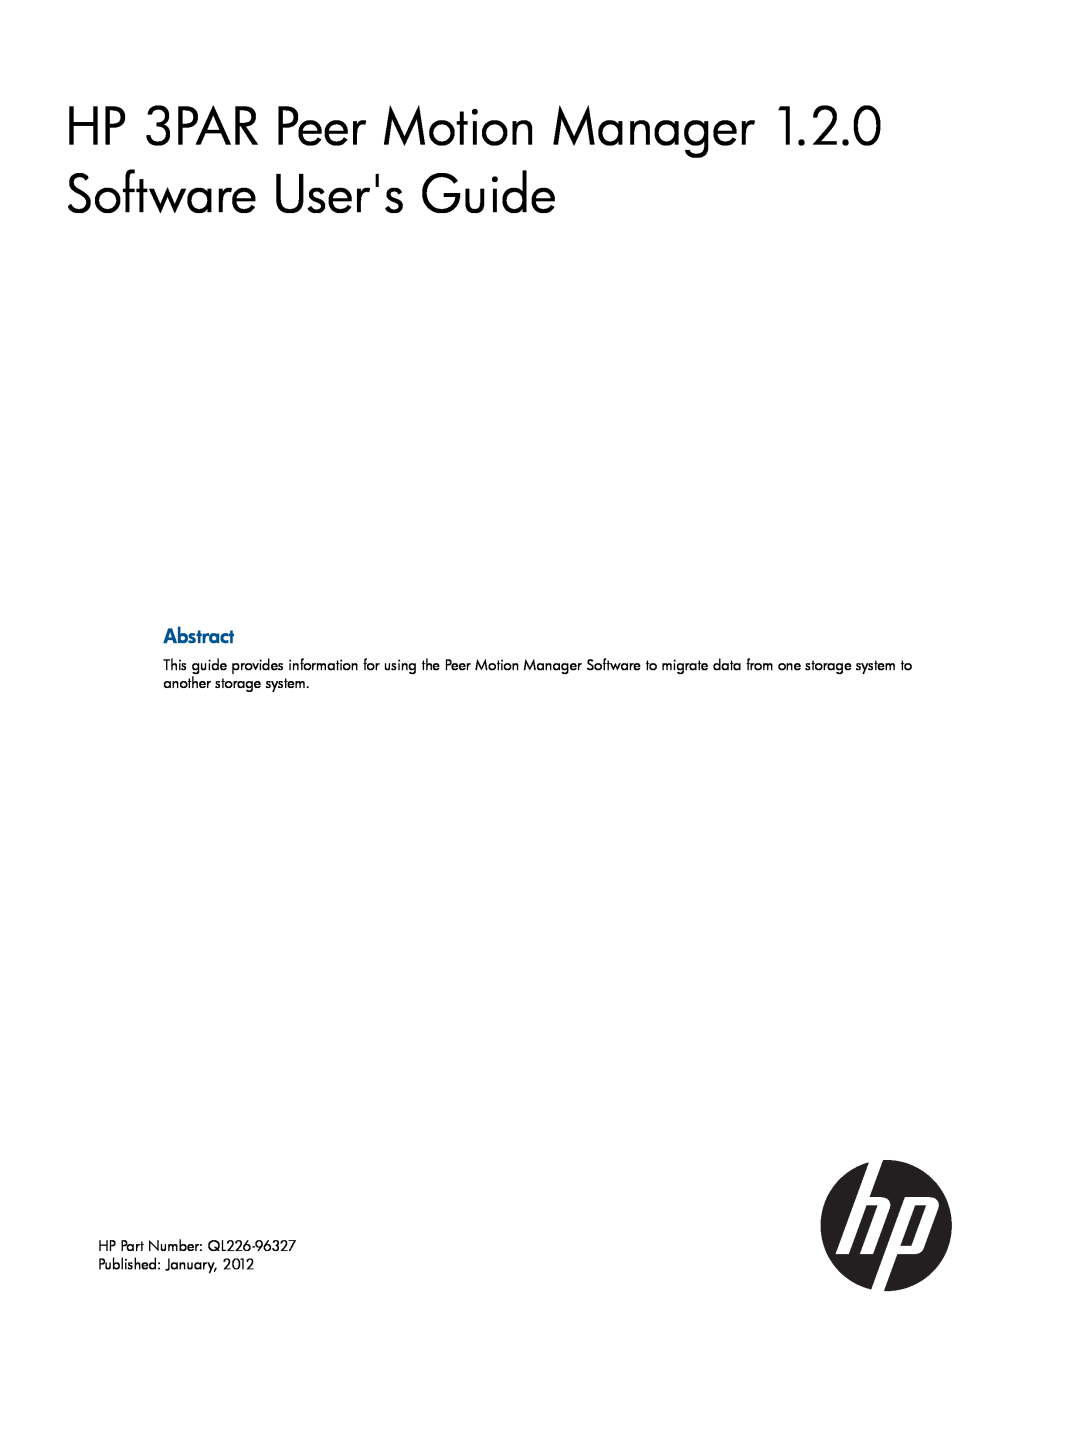 HP InForm Software manual Abstract, HP 3PAR Peer Motion Manager 1.2.0 Software Users Guide 